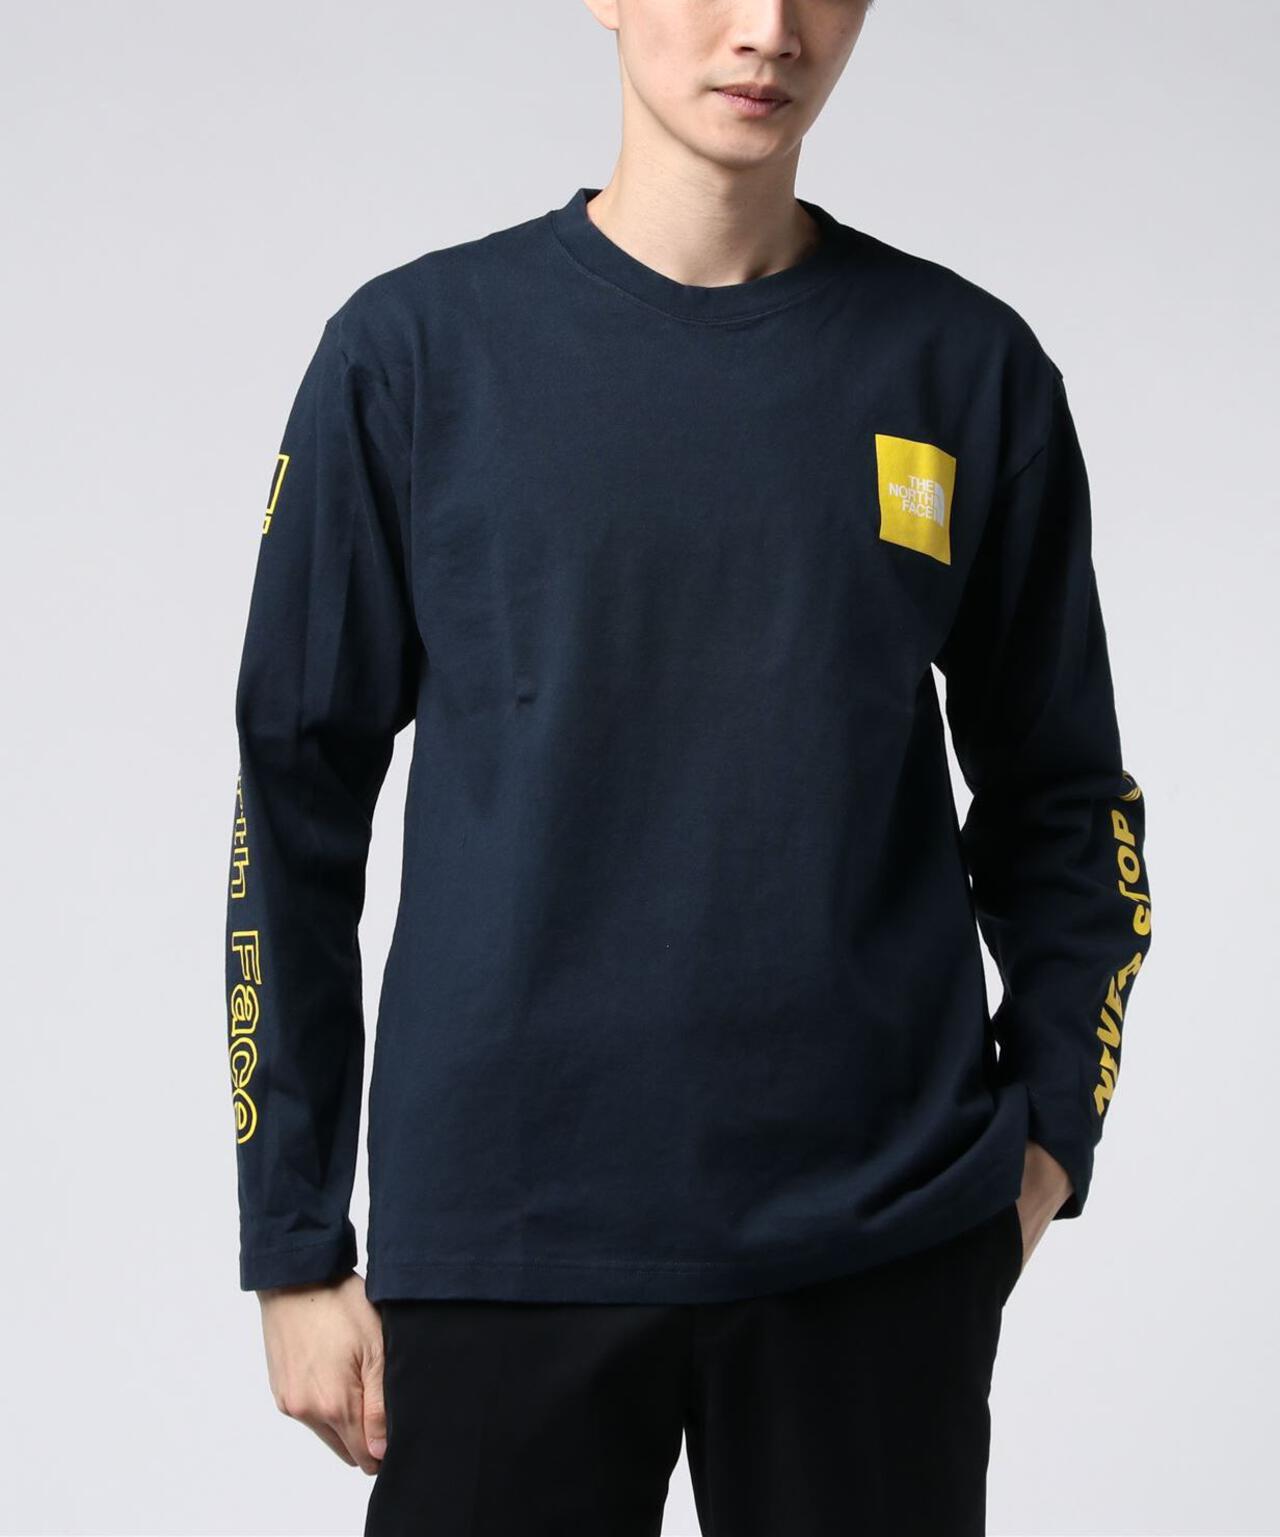 THE NORTH FACE/ザ ノースフェイス/L/S Sleeve Graphic Tee/グラフィックカットソー